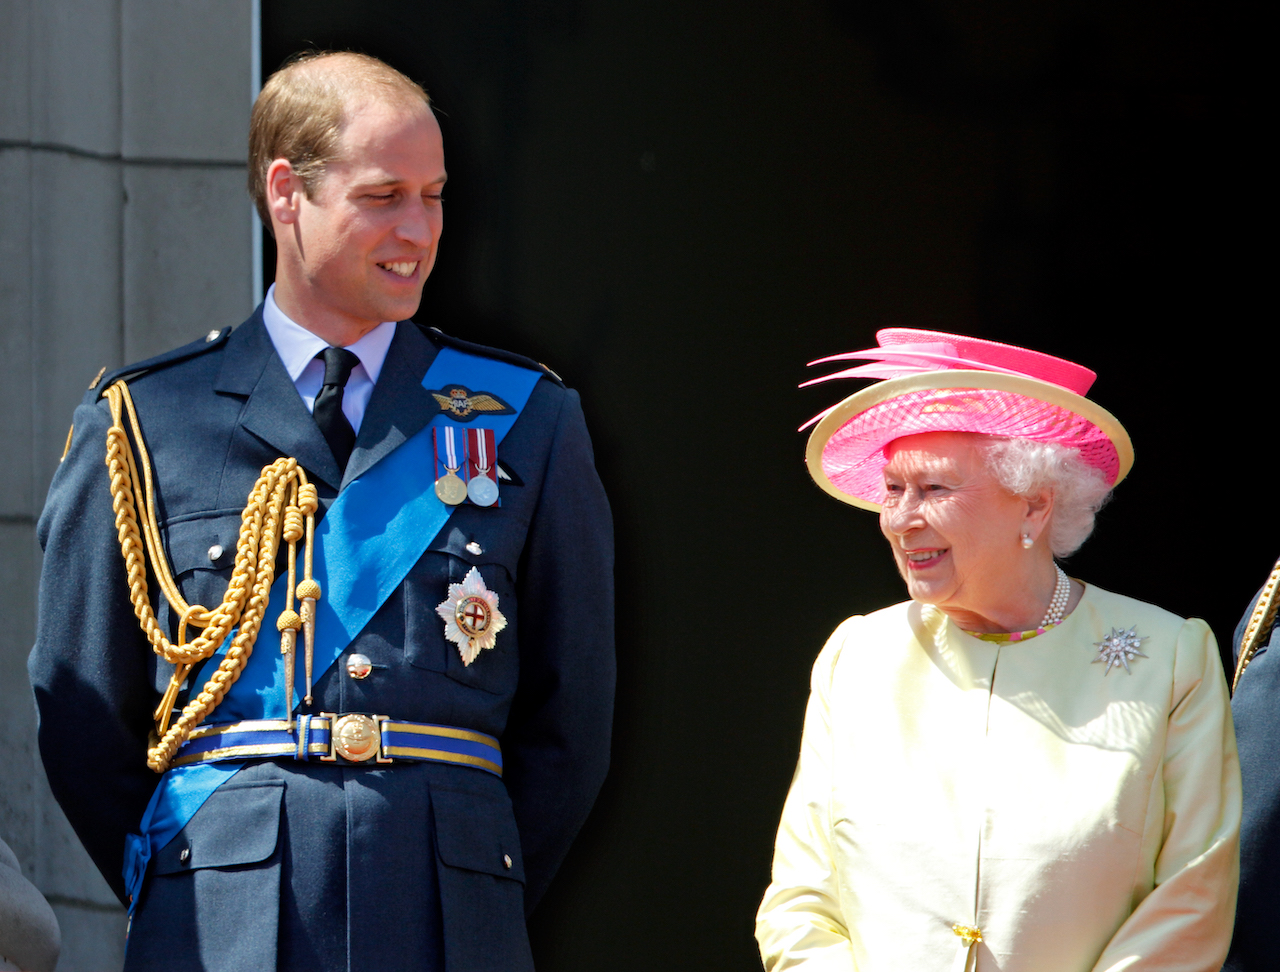 Former Royal Butler Points out Something Prince William Does That ‘the Queen Would Never’